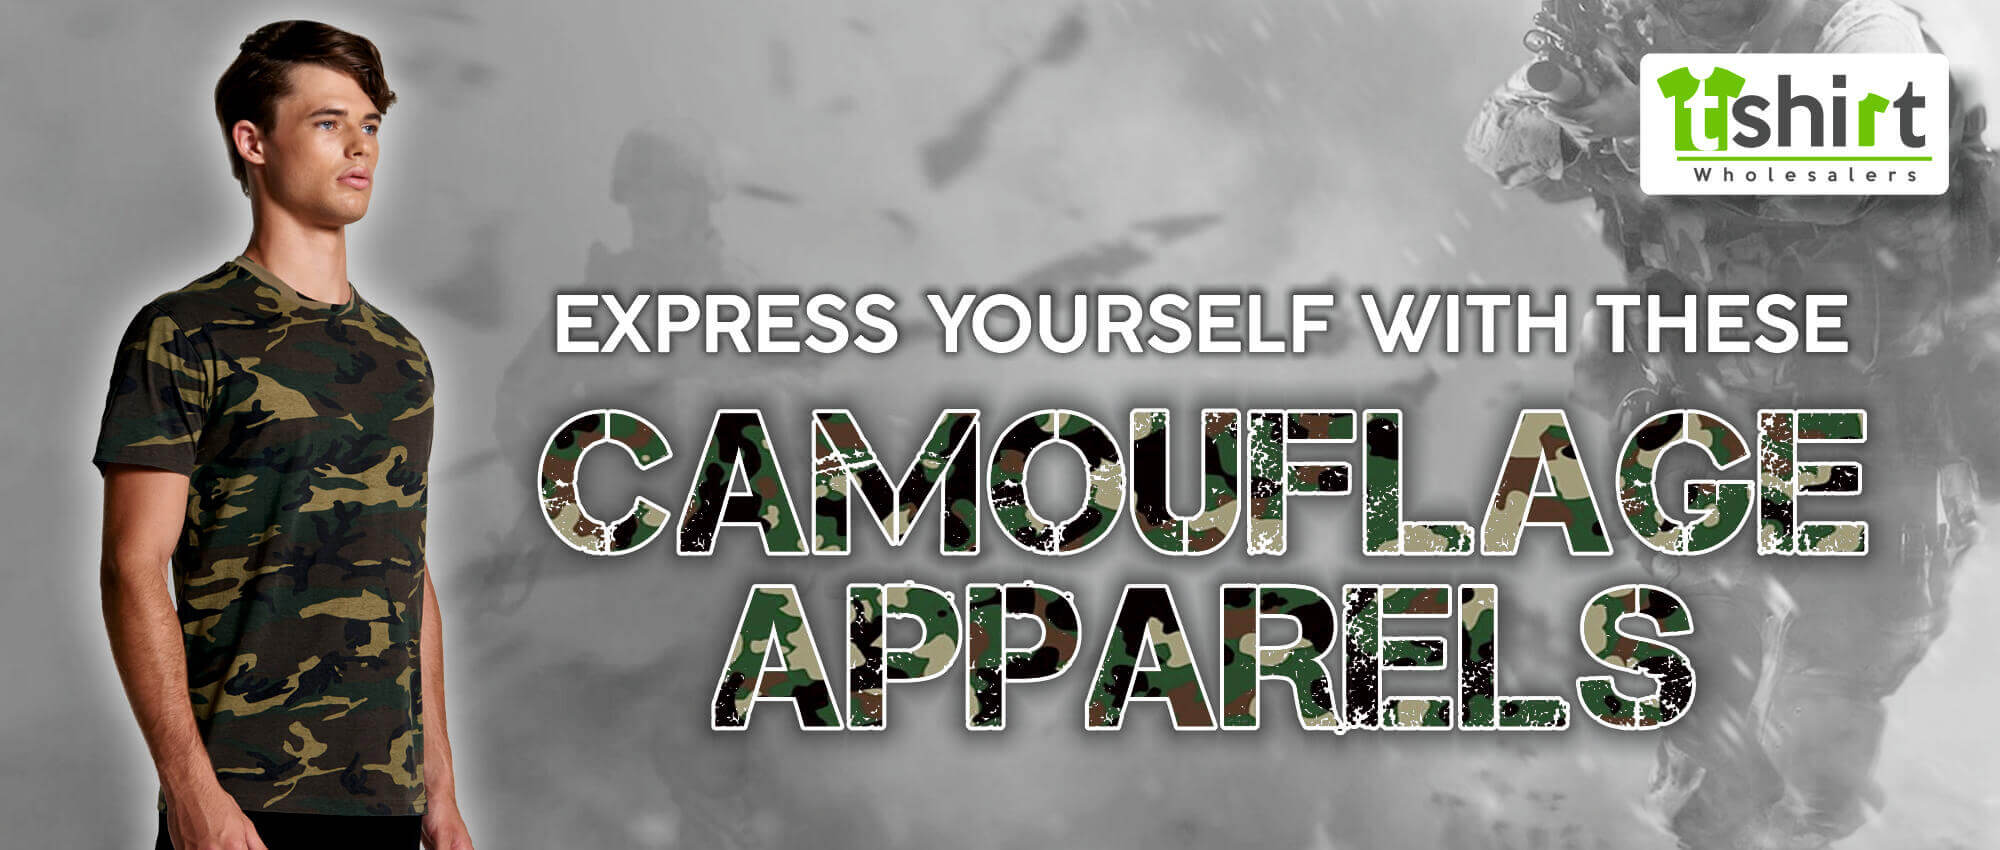 EXPRESS YOURSELF WITH THESE CAMOUFLAGE APPARELS